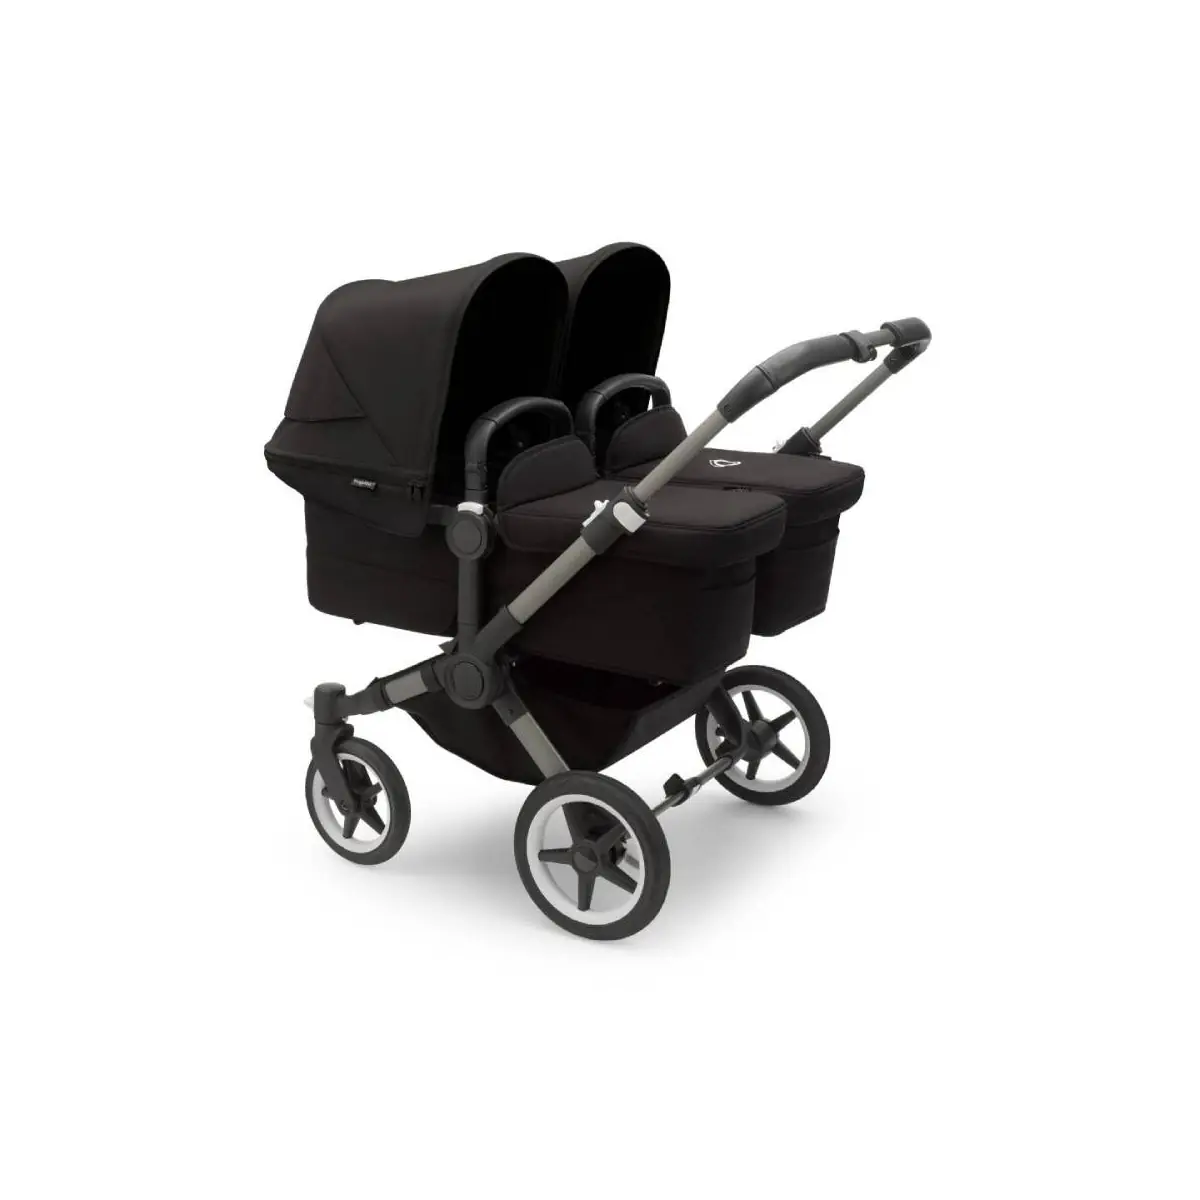 Image of Bugaboo Donkey 5 Twin Styled By You Pushchair-Graphite/Midnight Black/Midnight Black